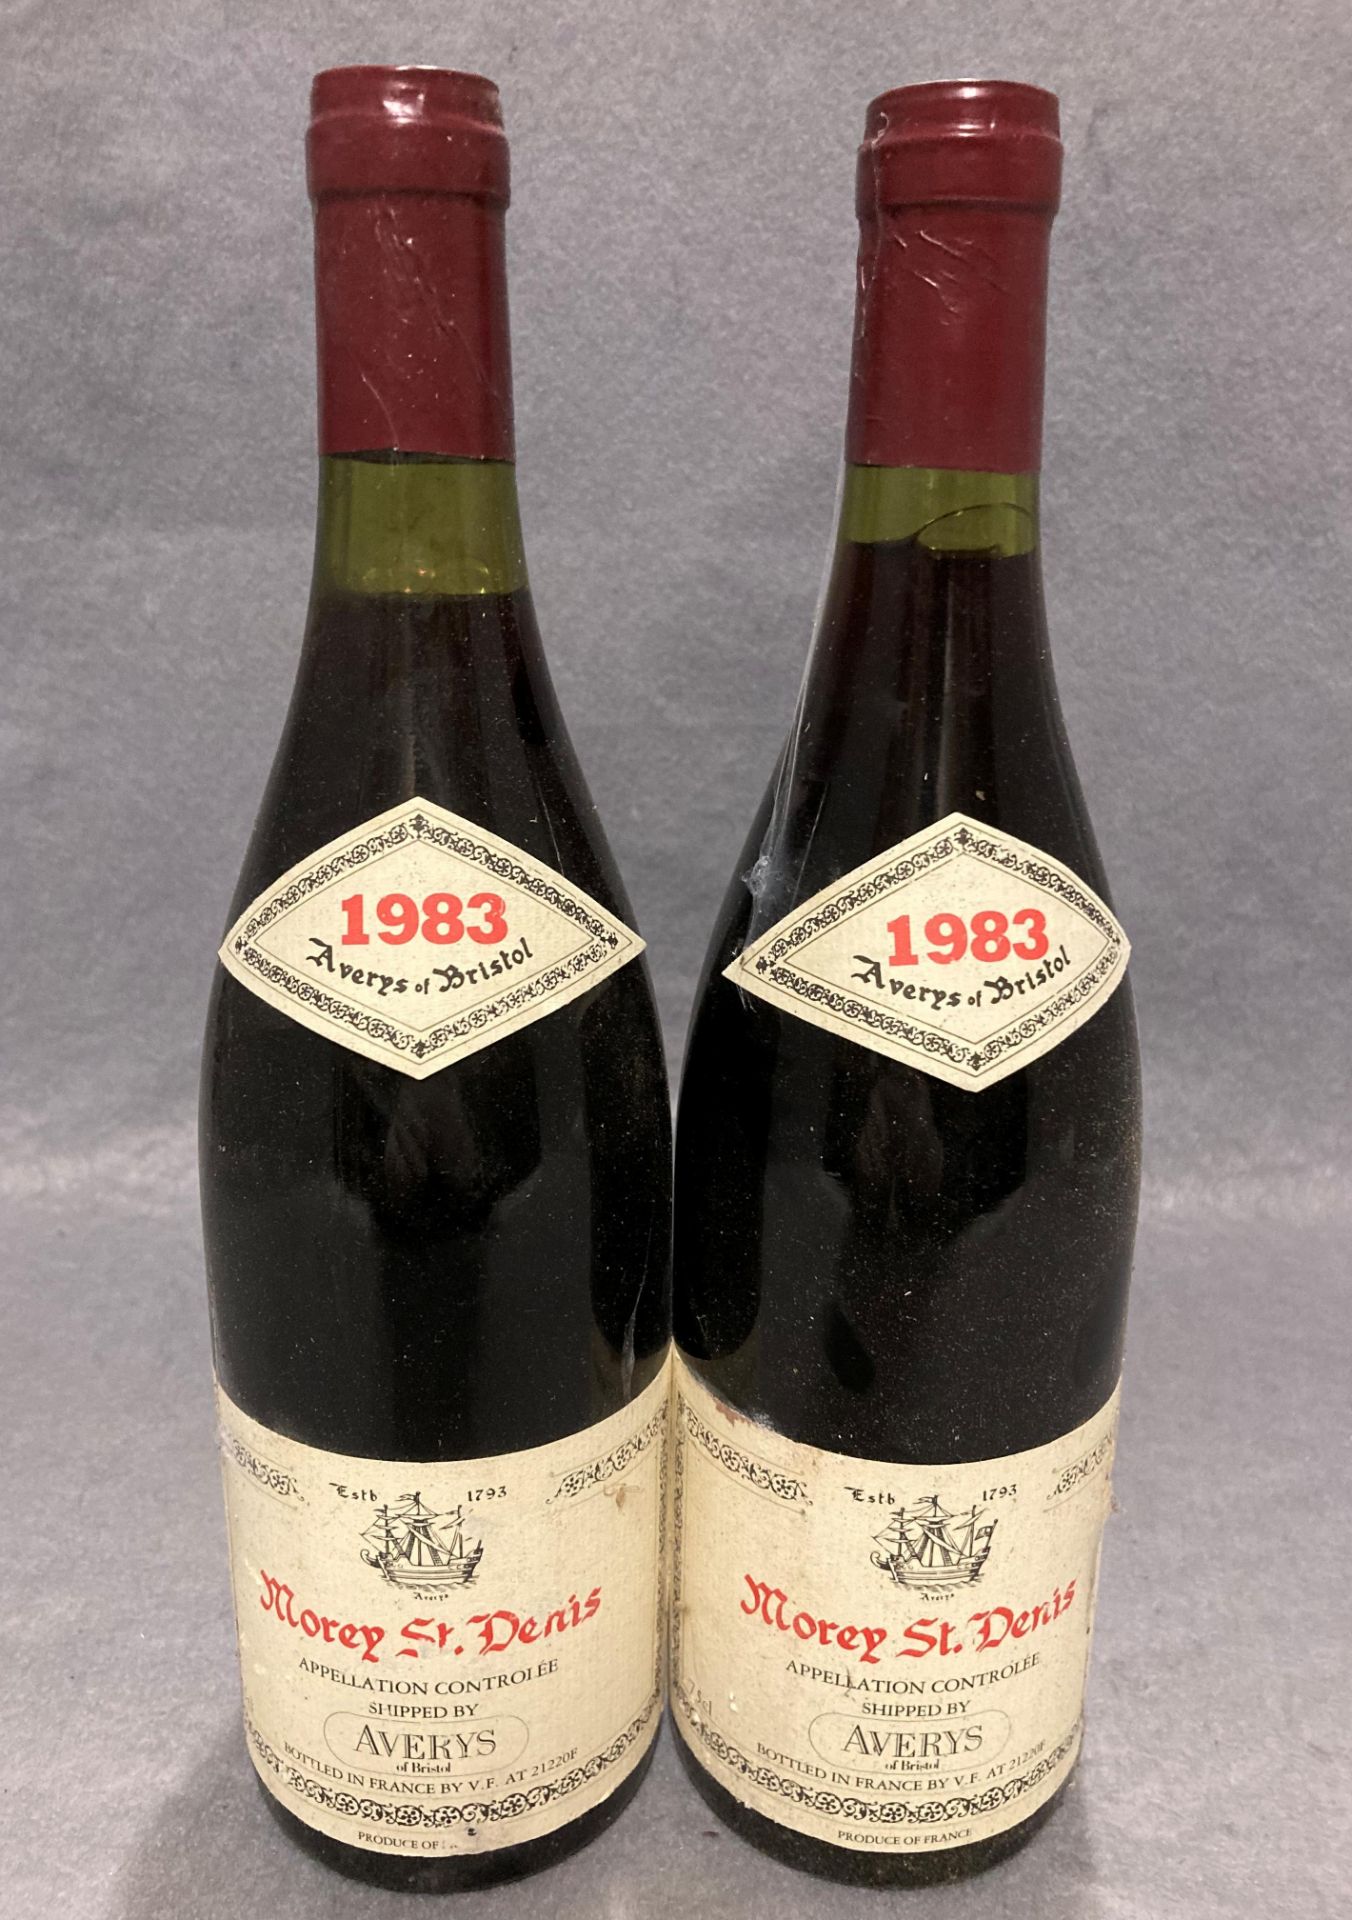 Twelve 75cl bottles of Morey St Denis 1983 red wine - shipped by Averys of Bristol - advised stored